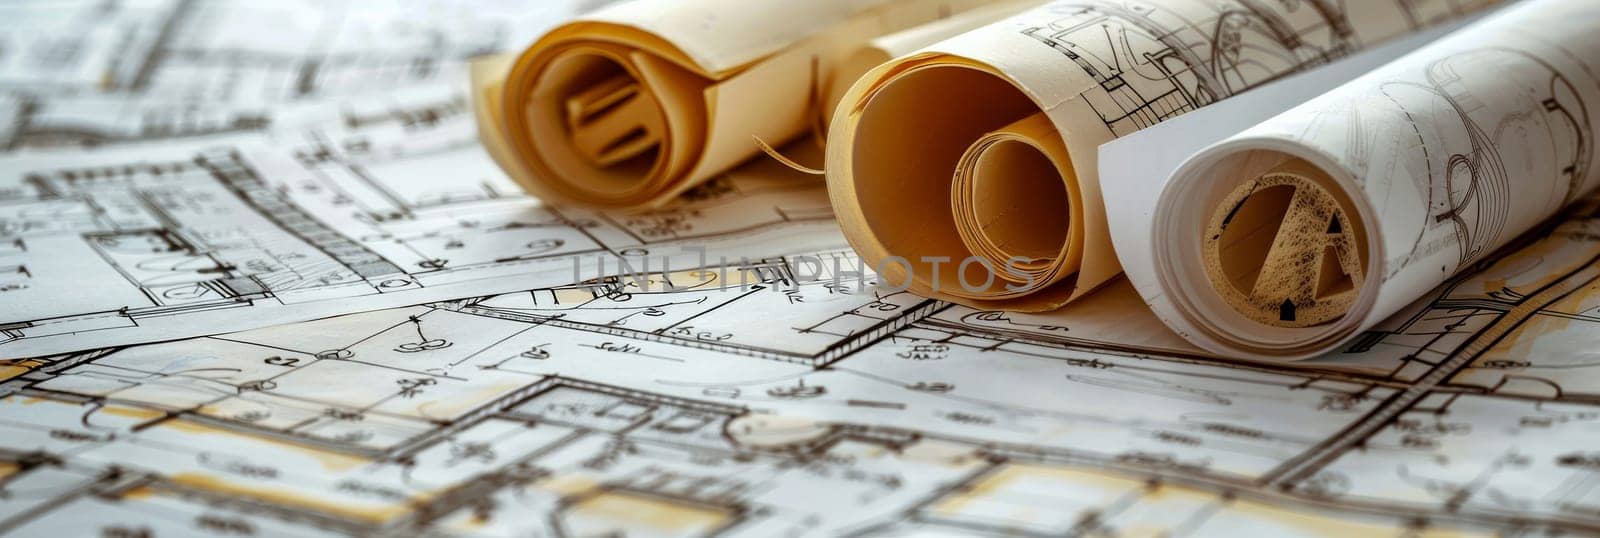 Rolled up architectural drawings rest atop a blueprint, revealing intricate design plans for a project renovation sketch.